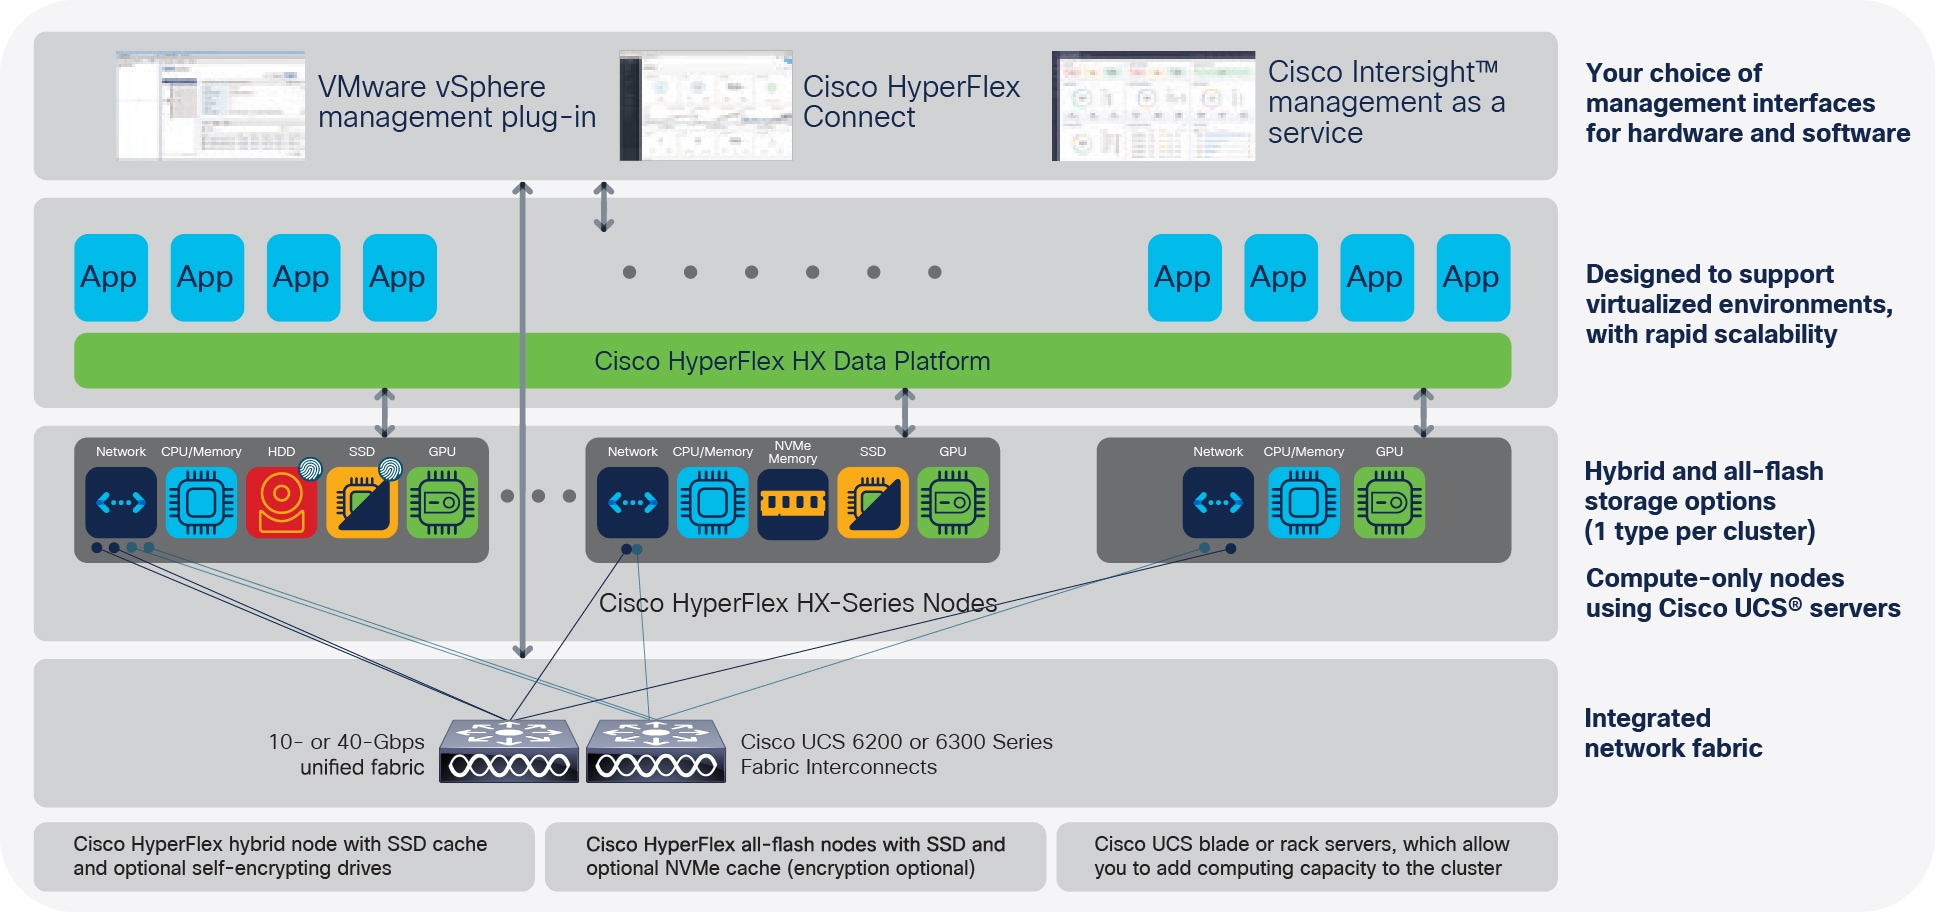 Only Cisco HyperFlex systems deliver a combination of essential features in a single solution